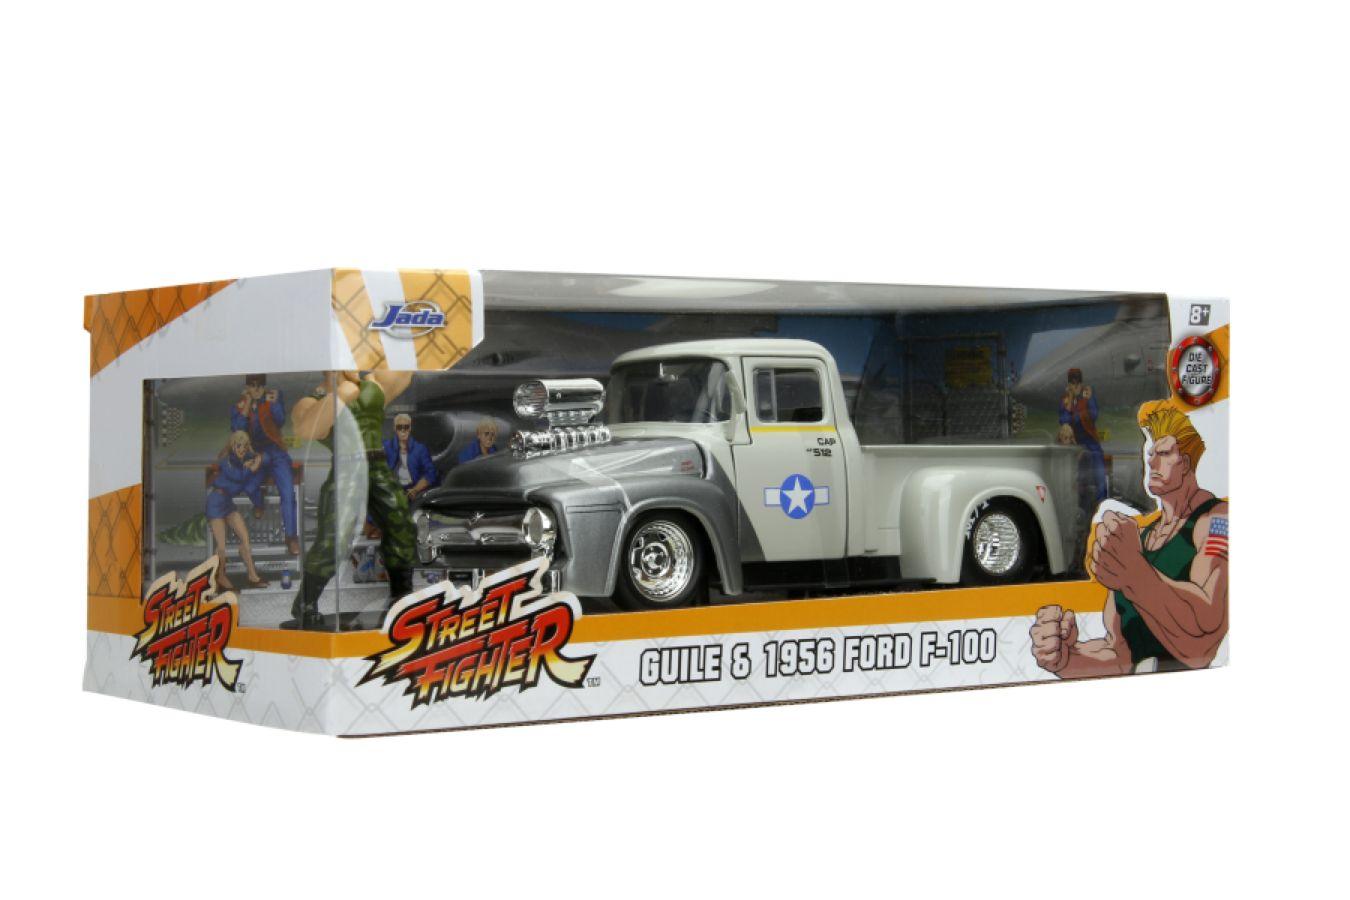 Street Fighter - Ford F-100 (1956) 1:24 with Guile Figure Hollywood Rides Diecast Vehicle Jada Toys Titan Pop Culture